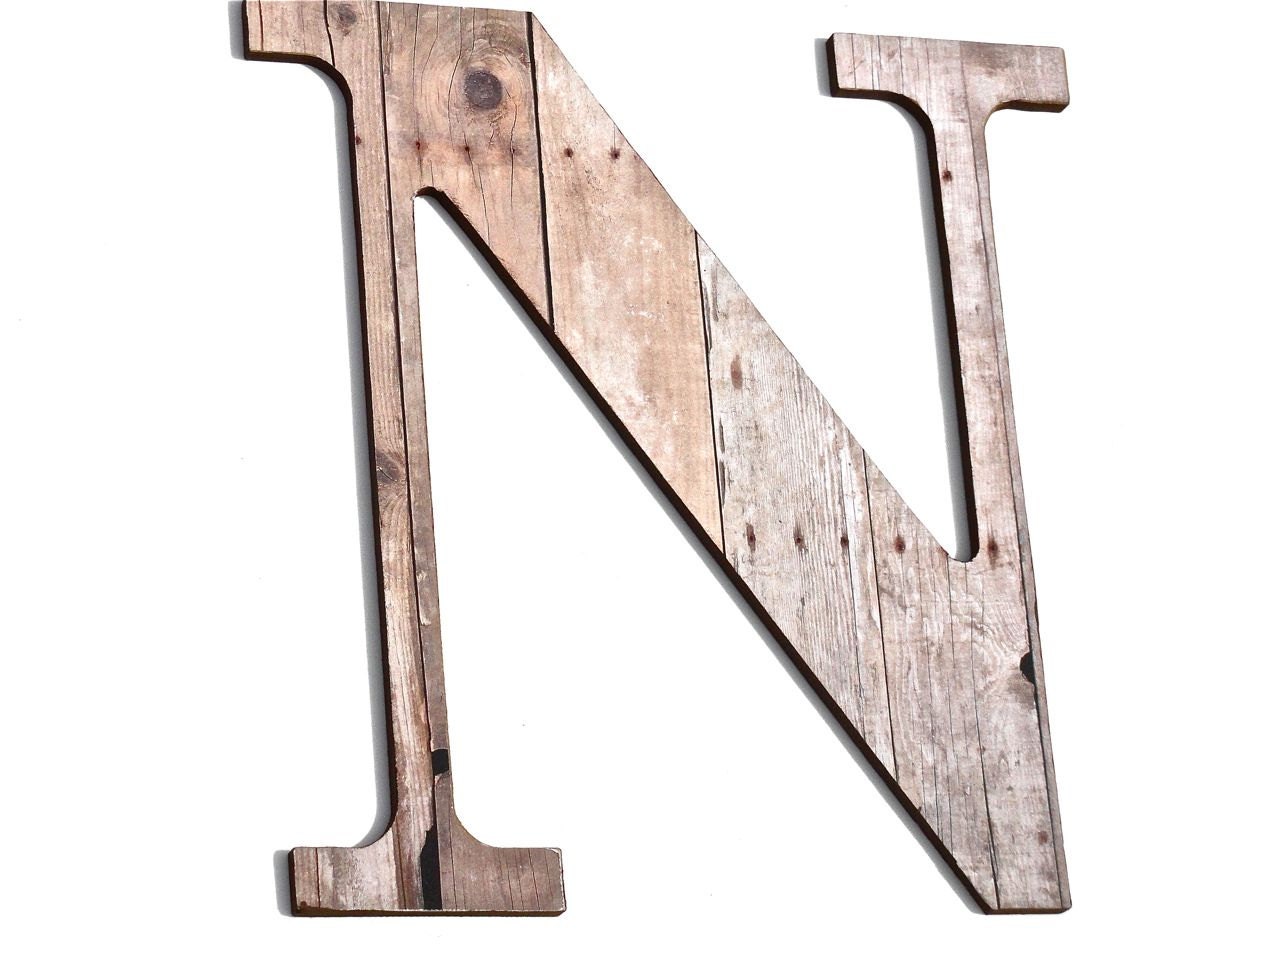 Wooden Letter N, Wood Grain, Crafting Paper, Initials, Country, Rustic, Chic Decor, Wall decorative Letters - compulsivecollection